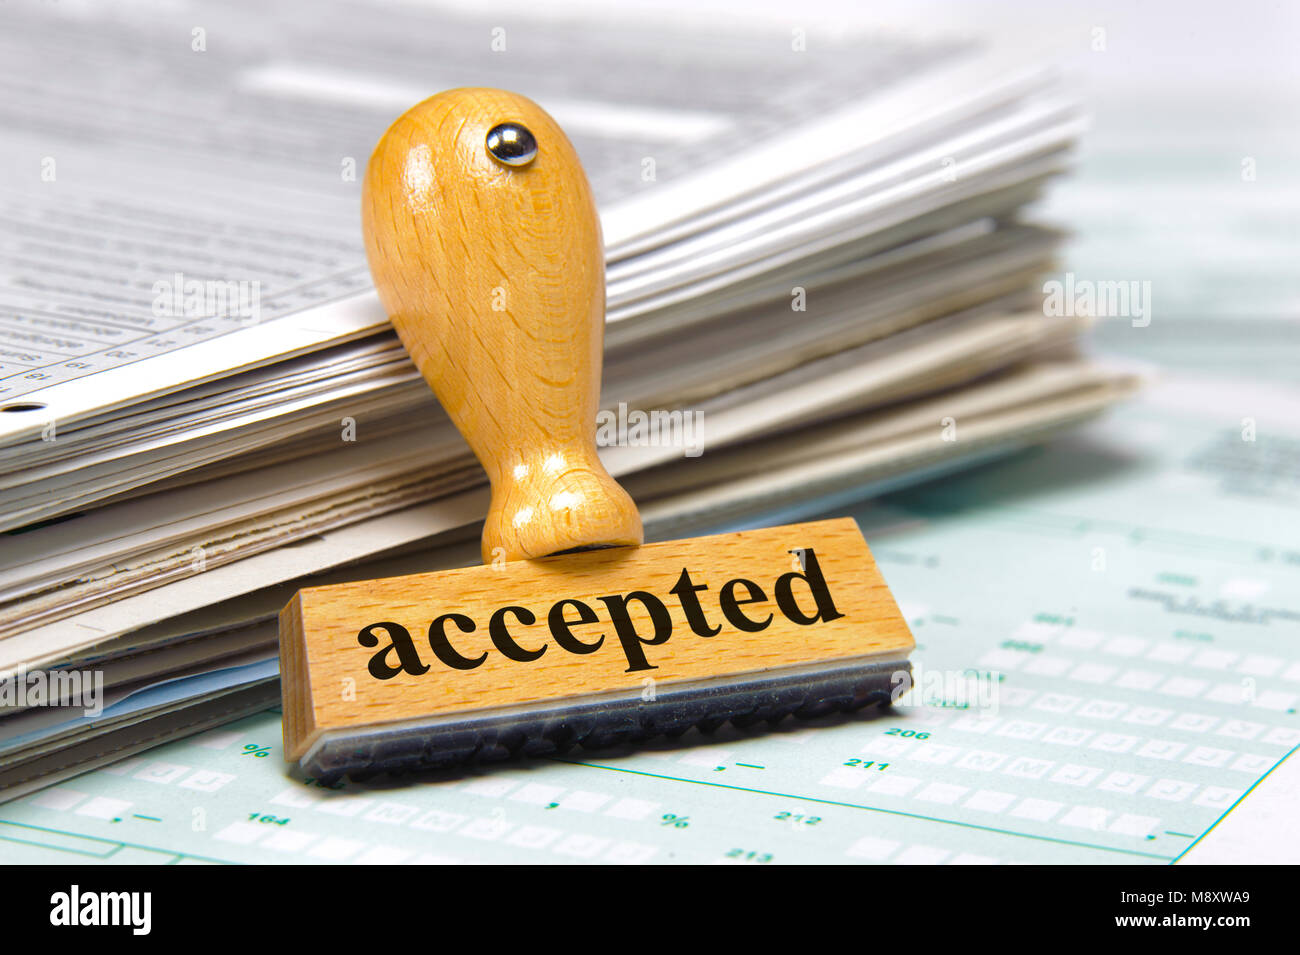 accepted printed on rubber stamp laying on documents Stock Photo